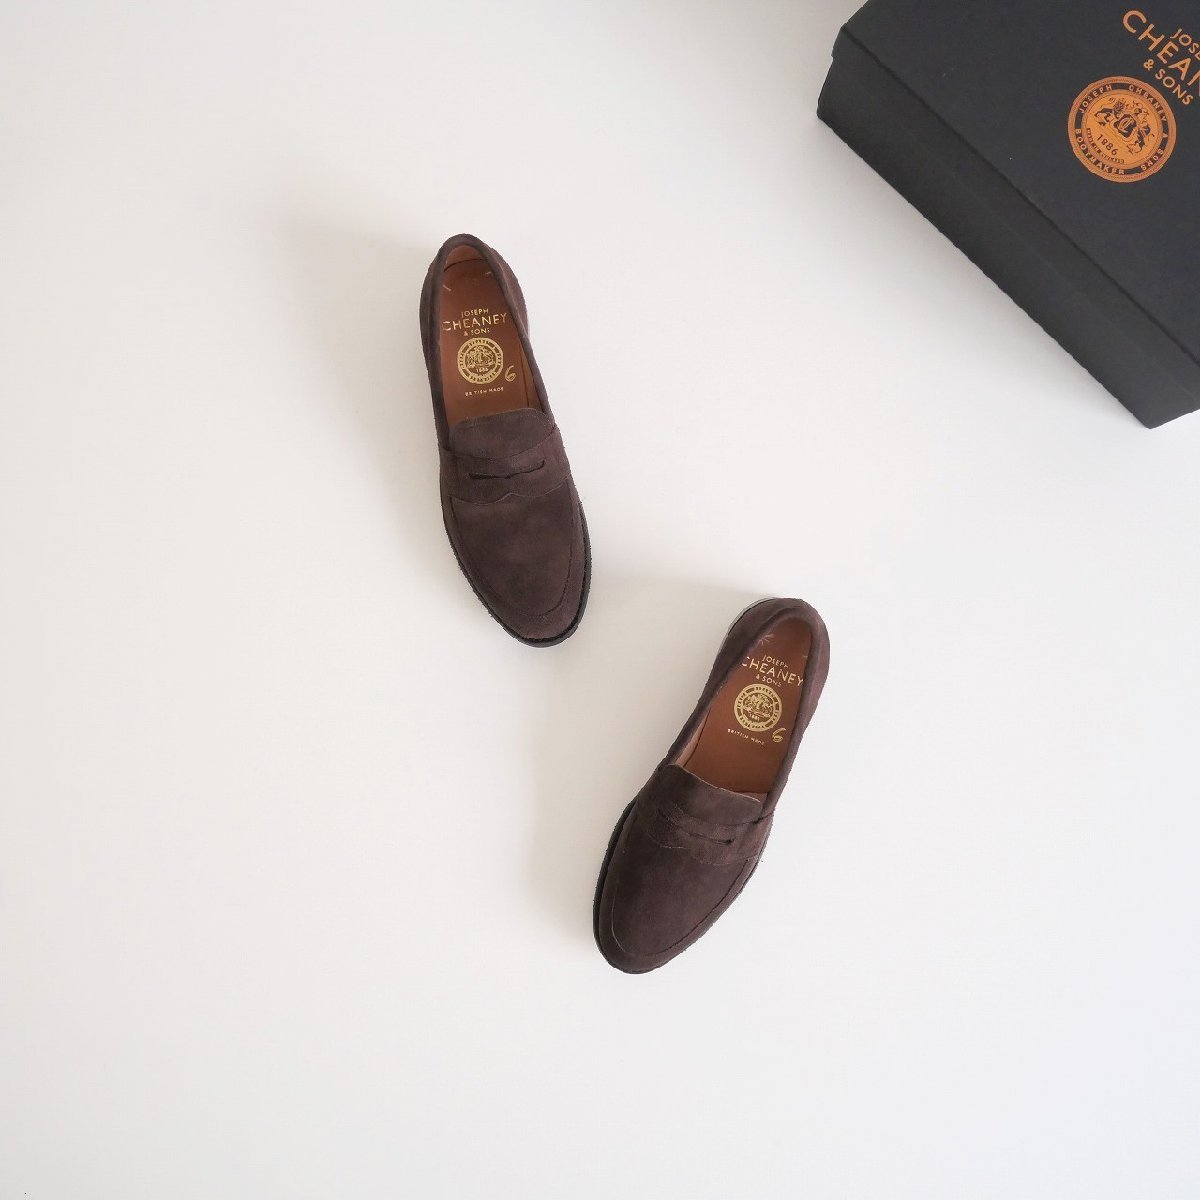 2022 / JOSEPH CHEANEY ジョセフチーニー / BONNIE SUEDE LOAFERS / シューズ ローファー 5.5 / 6 BEAUTY&YOUTH別注 / 2301-0580